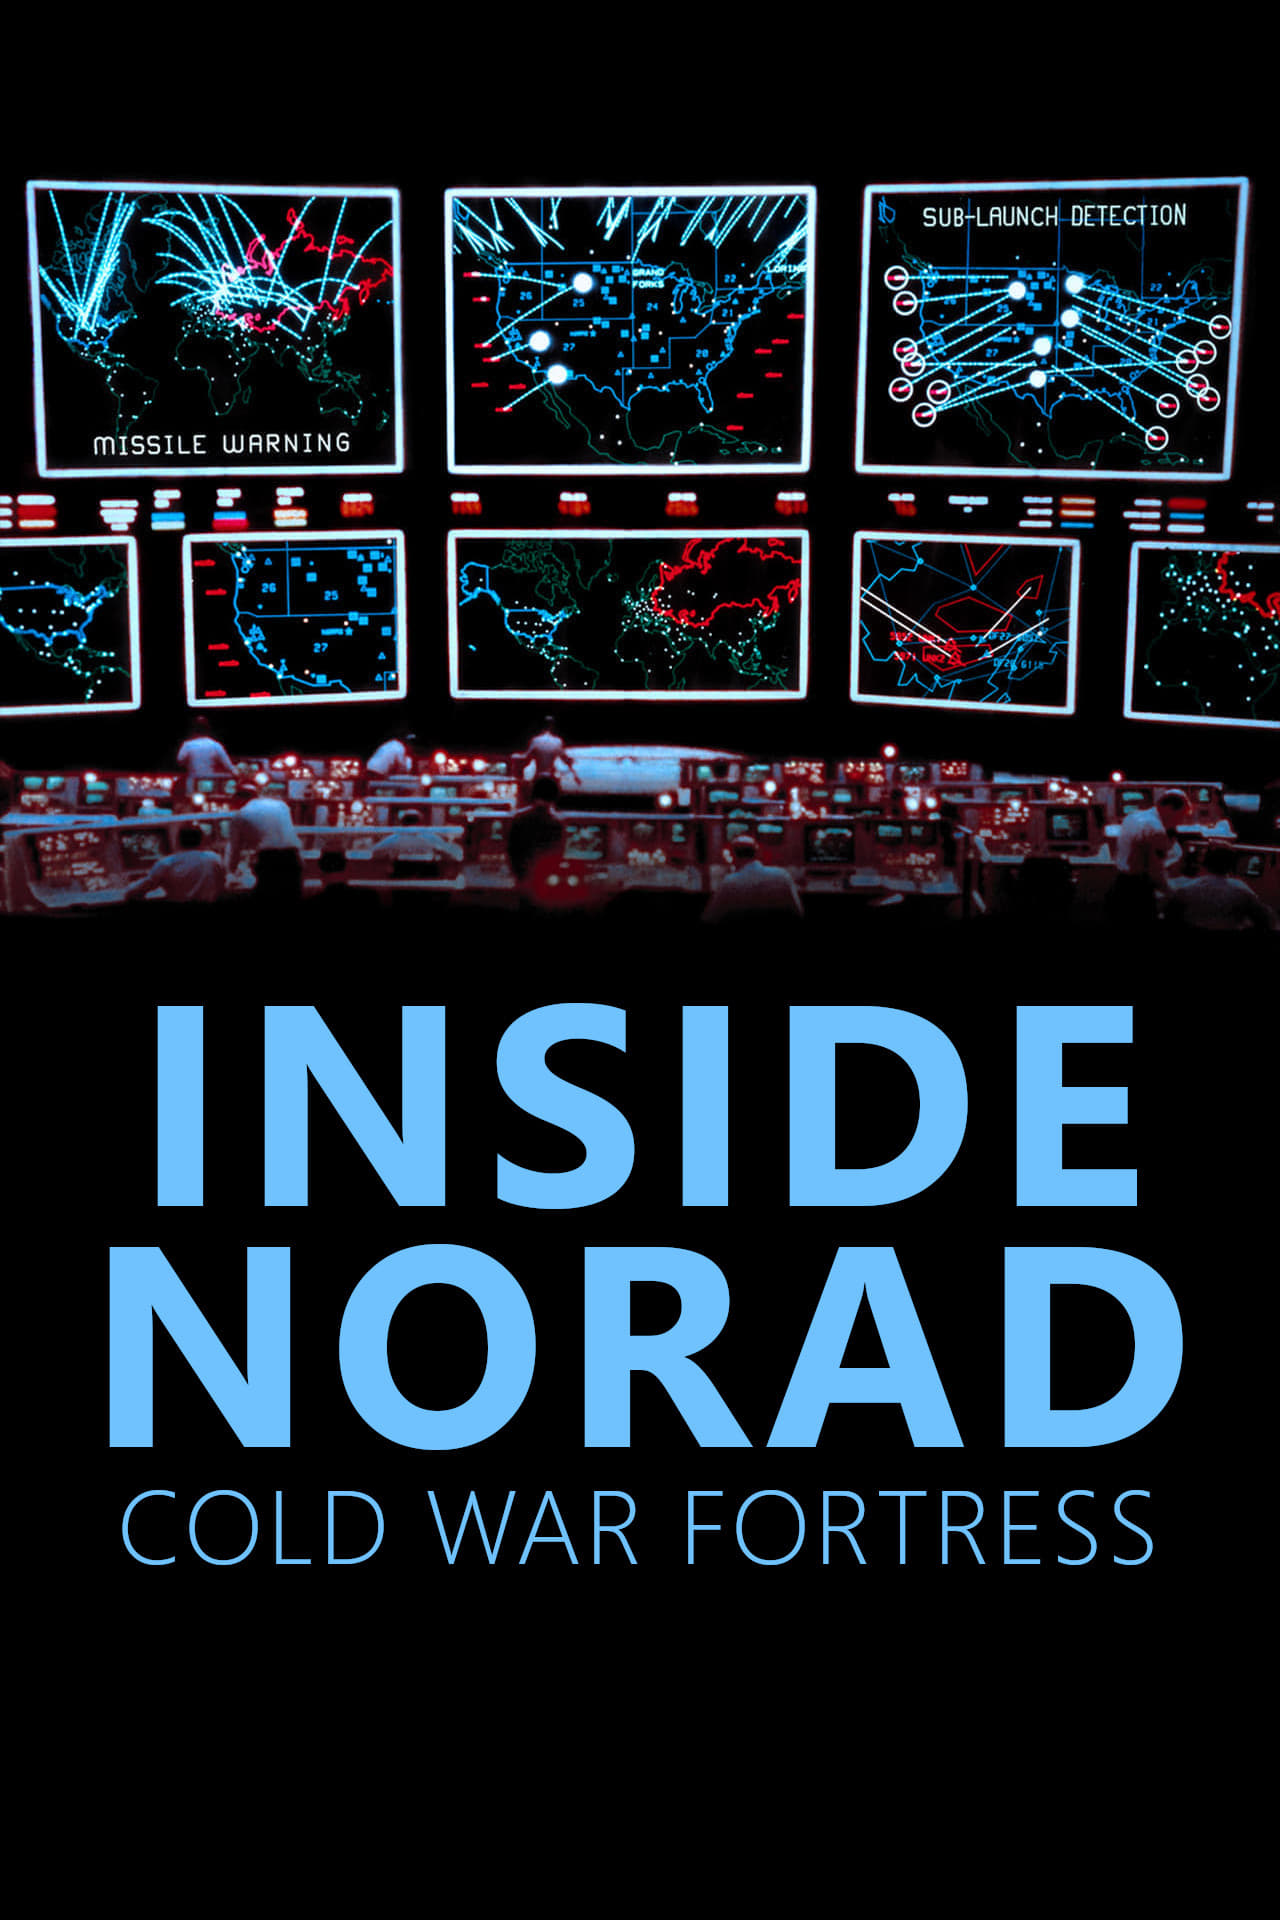 Inside Norad: Cold War Fortress